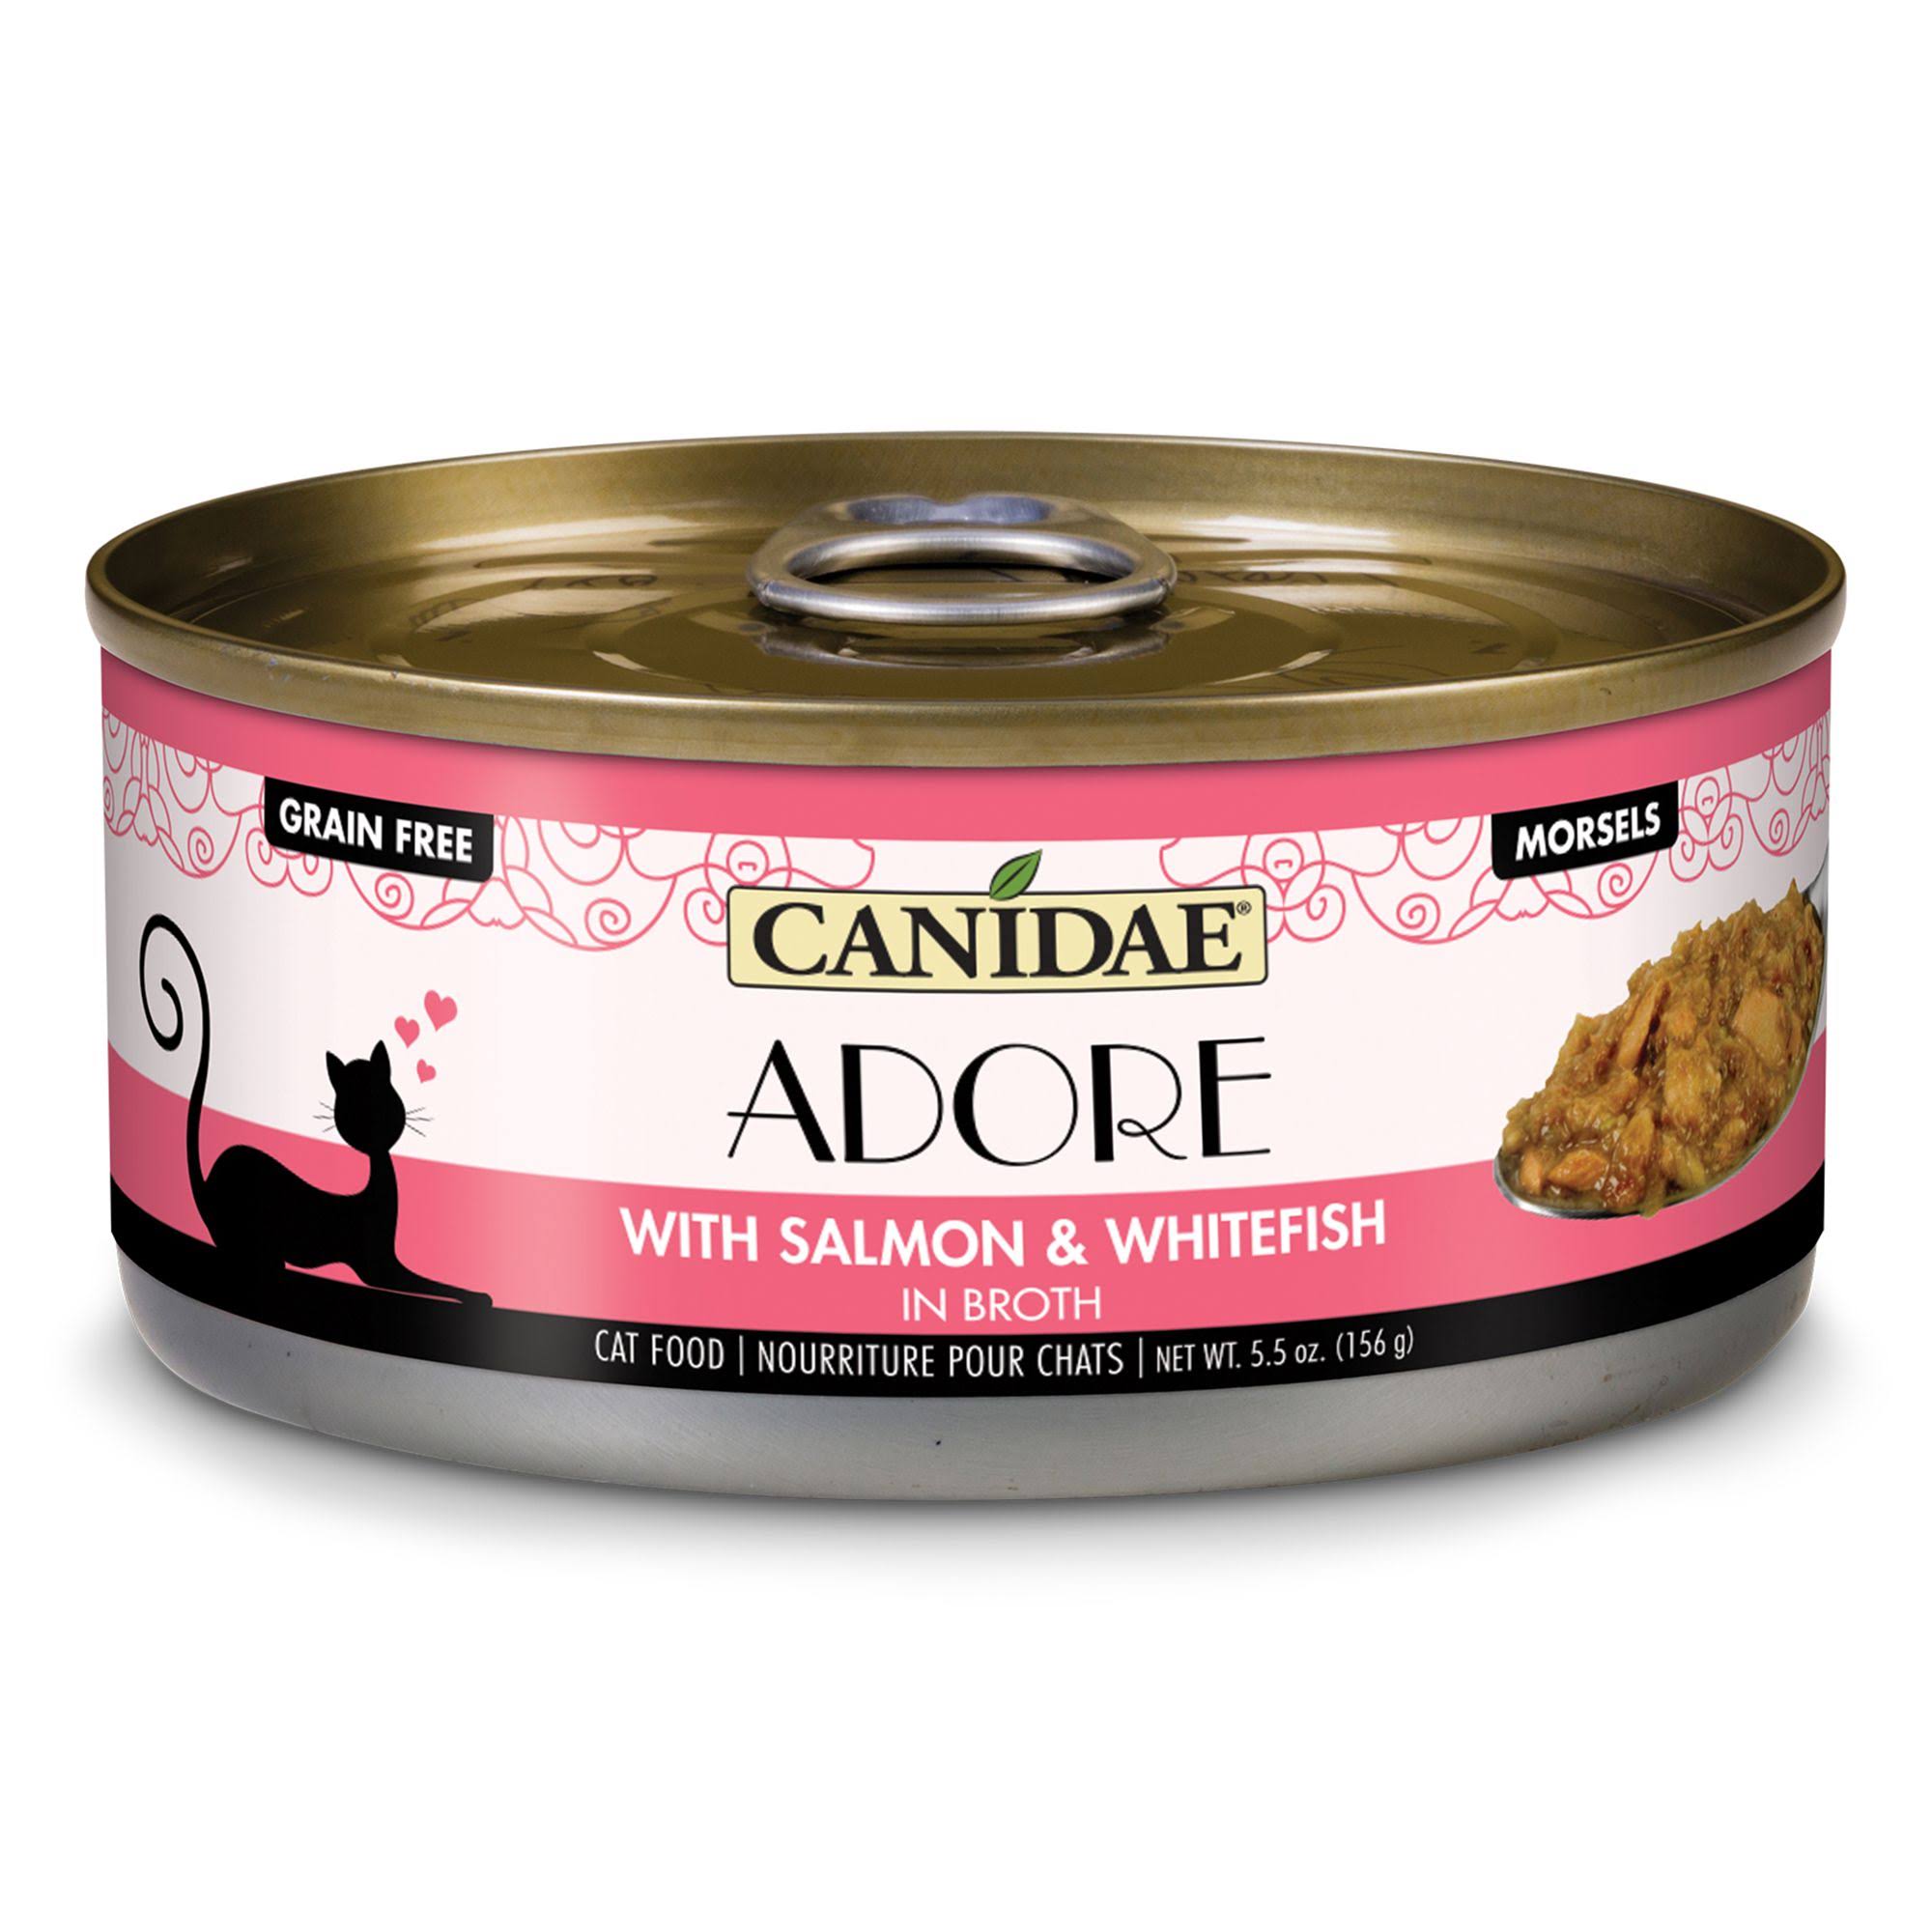 Canidae Adore Morsels Cat Wet Food - Grain Free